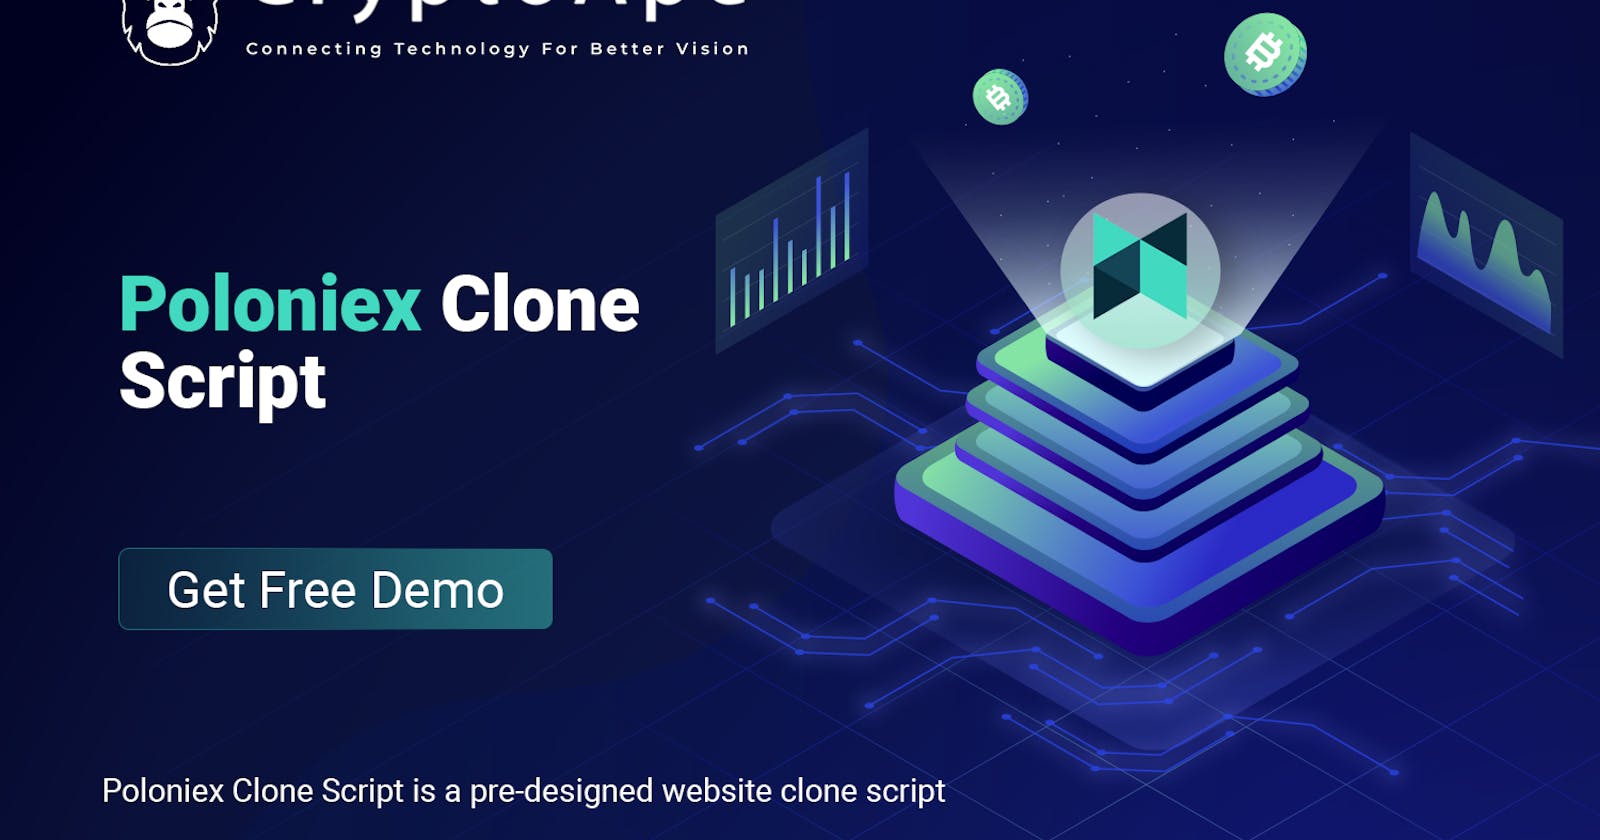 Want to deploy poloniex clone script that is highly secure for you Business